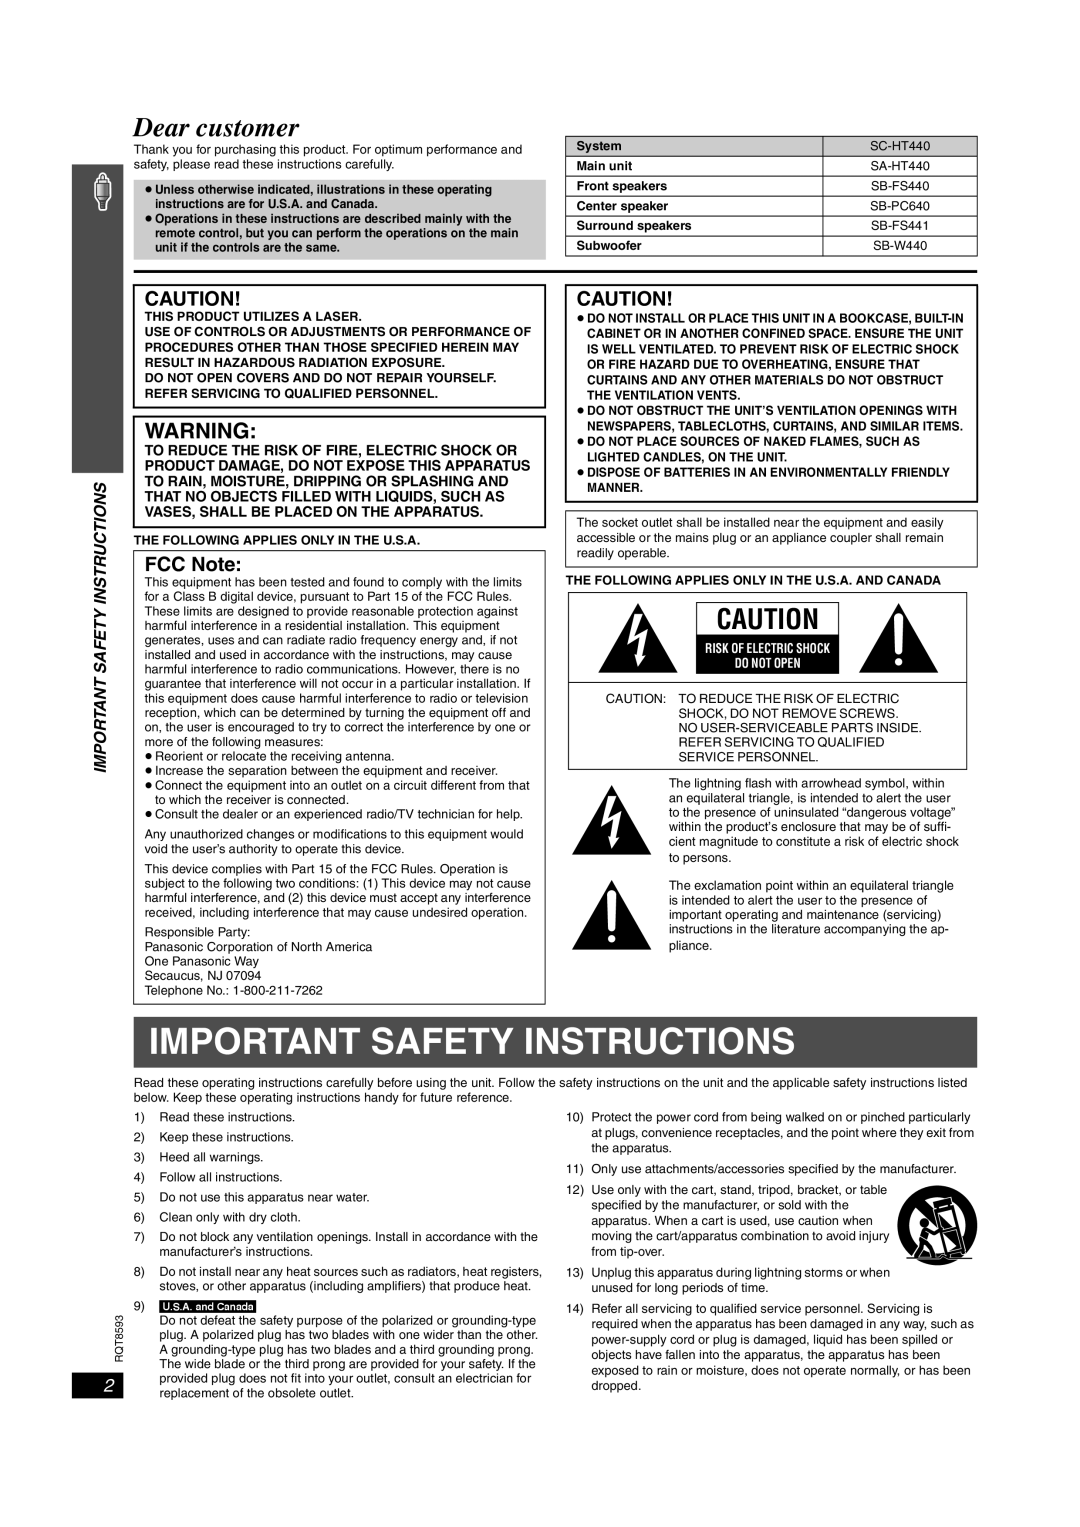 Panasonic SC-HT440 manual FCC Note, Important Safety Instructions, Dear customer, Risk Of Electric Shock Do Not Open 